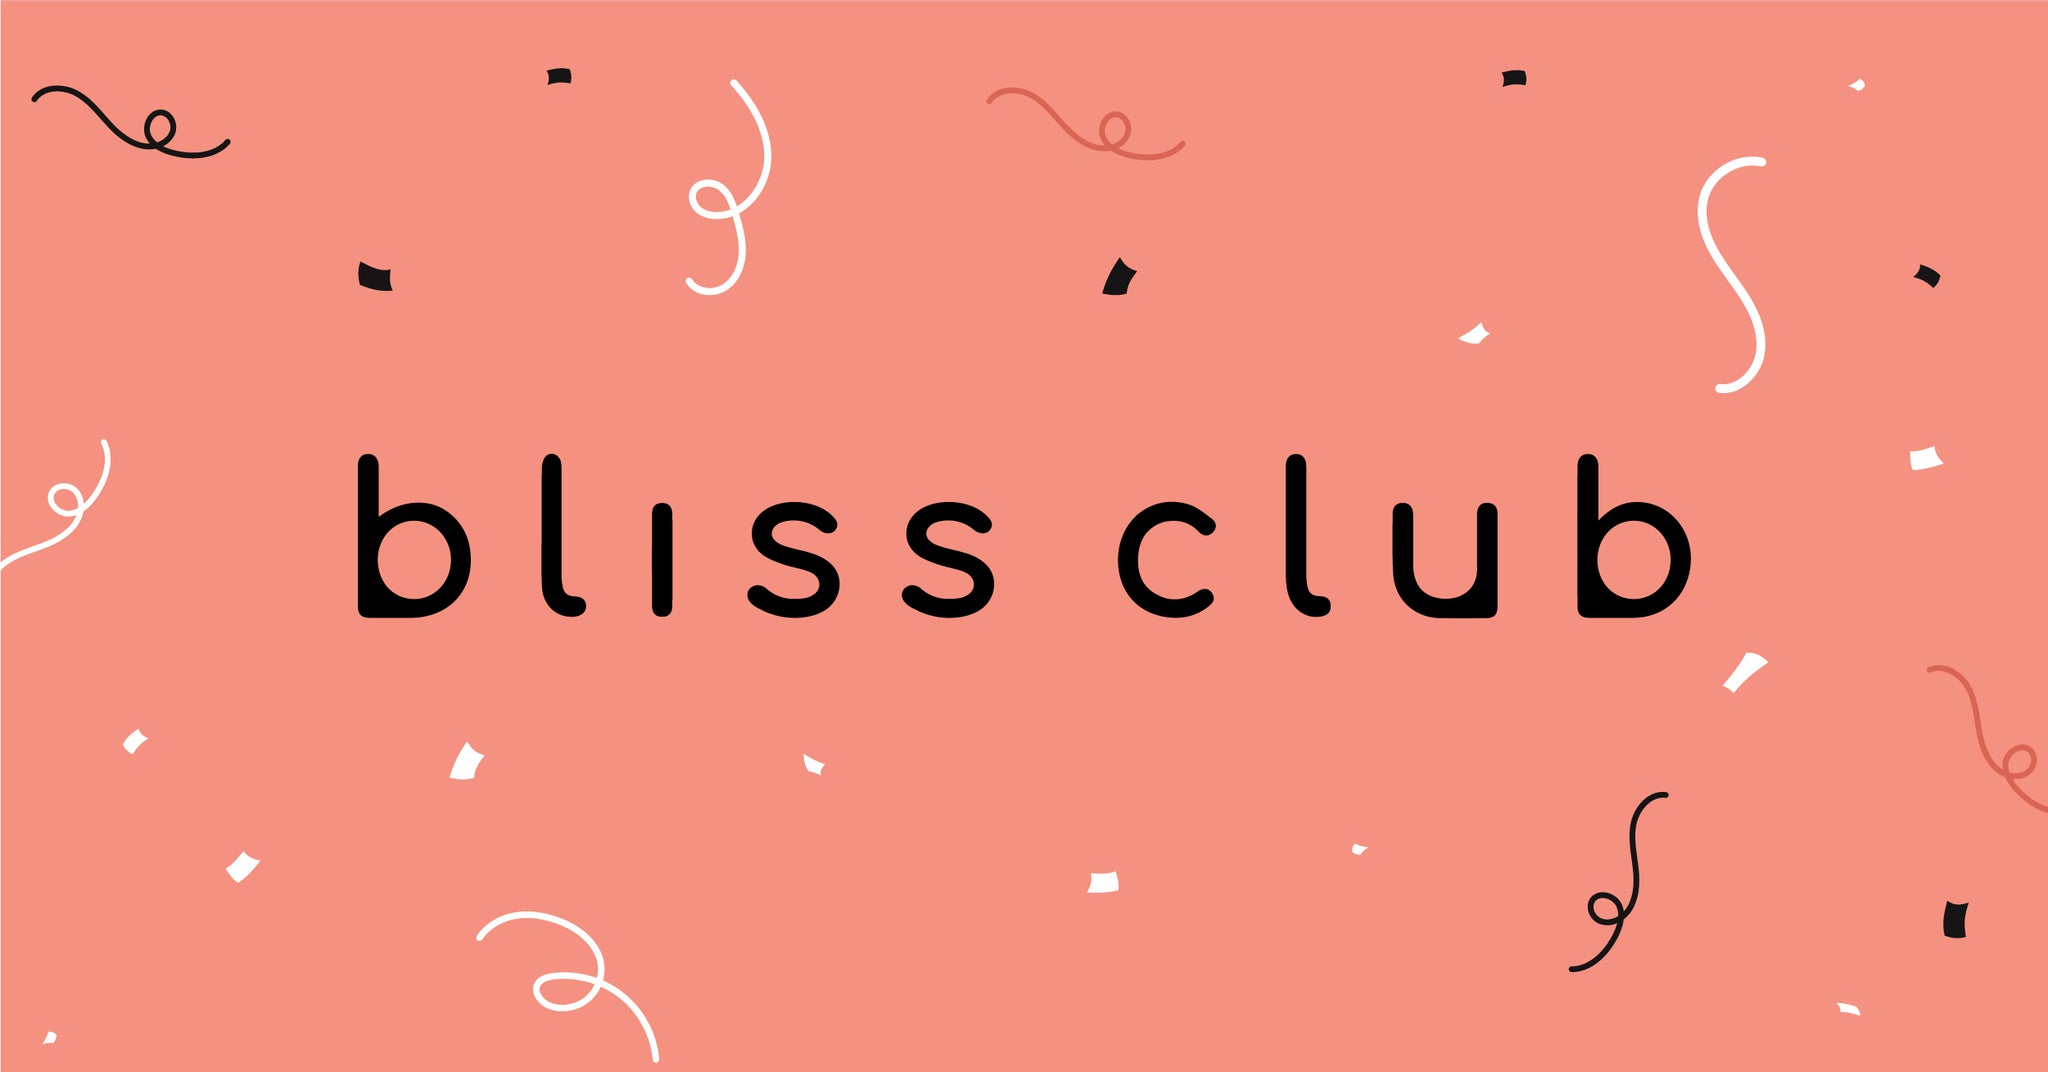 BlissClub record 40X growth since May 2021  #Women's #activelife wear brand,  Bliss Club has grown 40X since its seed round in May 2021. Founder and CEO,  Minu Margeret talks to Shruti